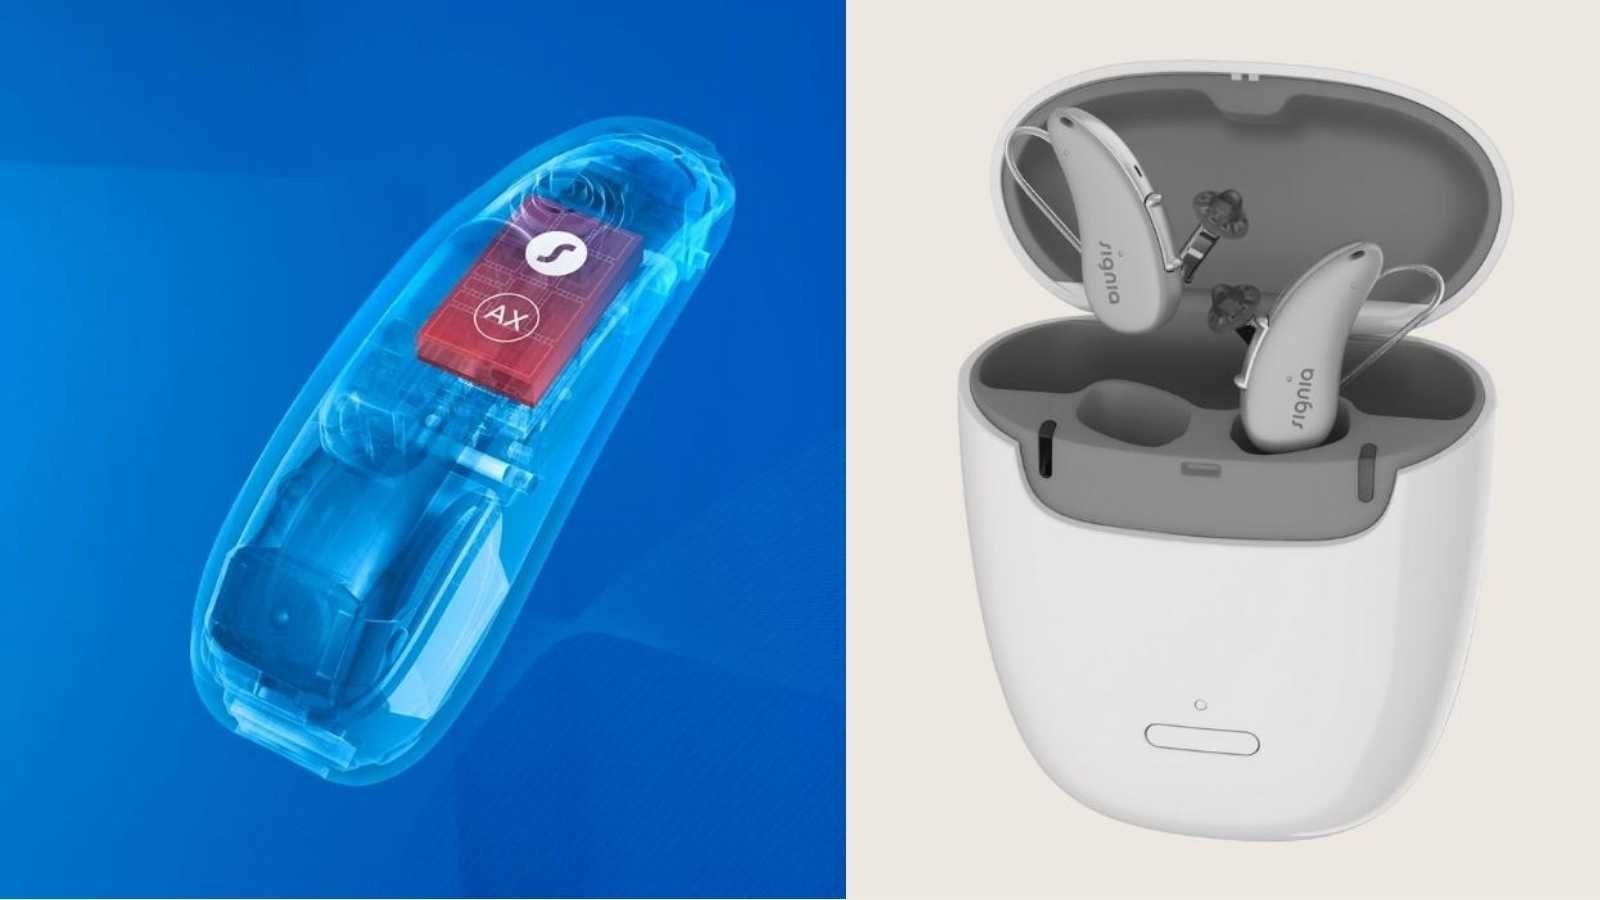 Signia dual chip technology pictured inside the AX hearing aid